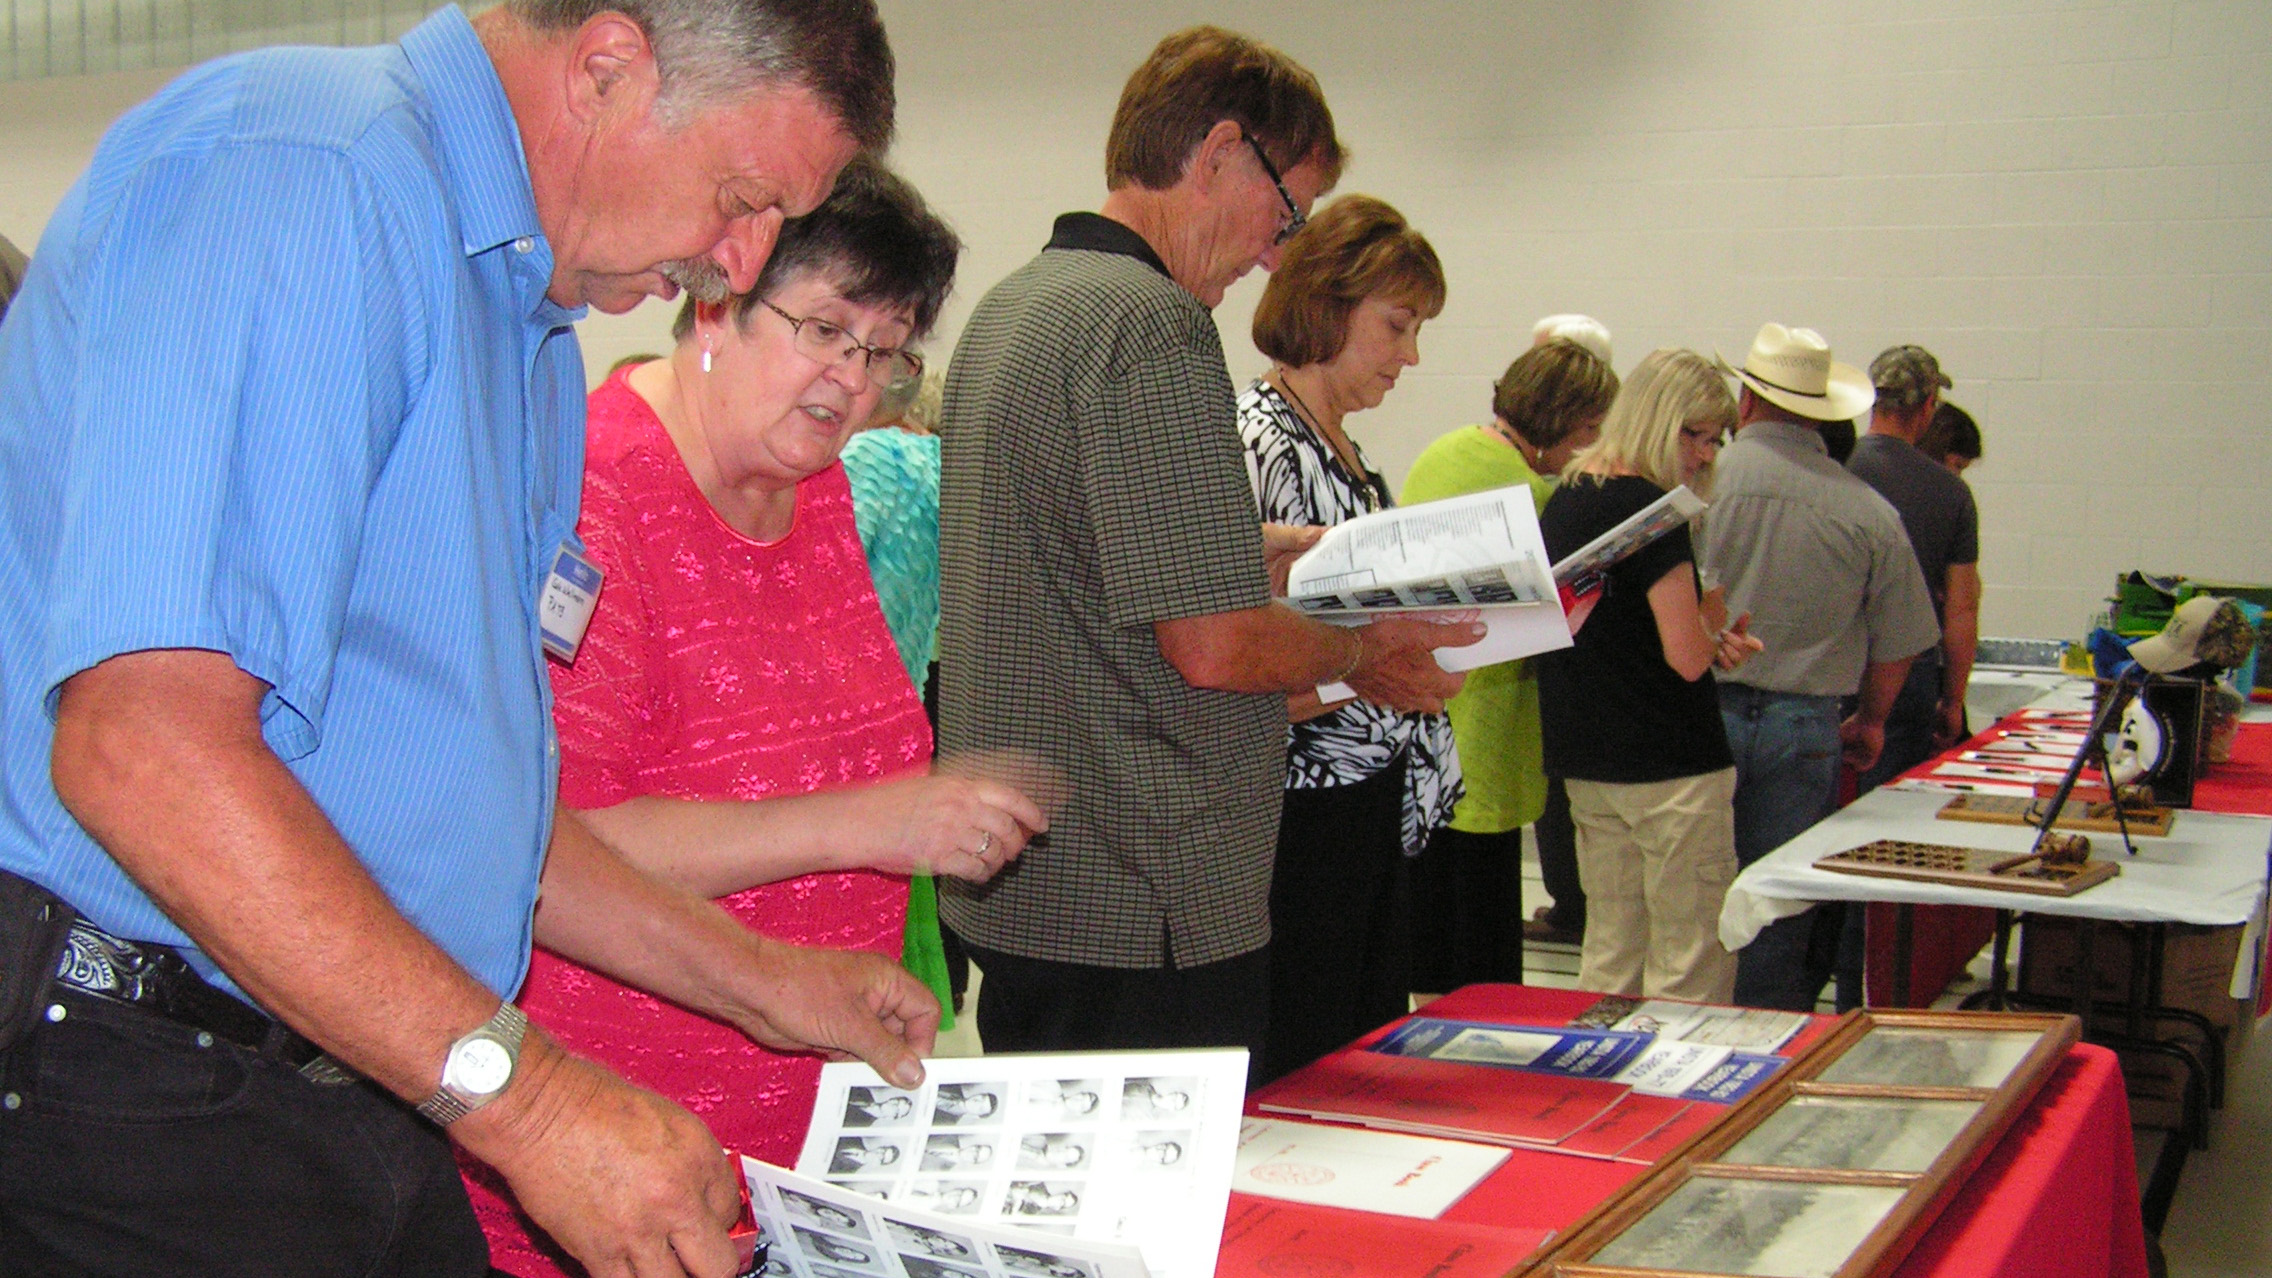 Alumni and friends view memorabilia such as Aggie class annuals and historical photographs in August 2013, celebrating the 100th anniversary of the Curtis Aggie campus. (Photo by Mary Crawford / NCTA)